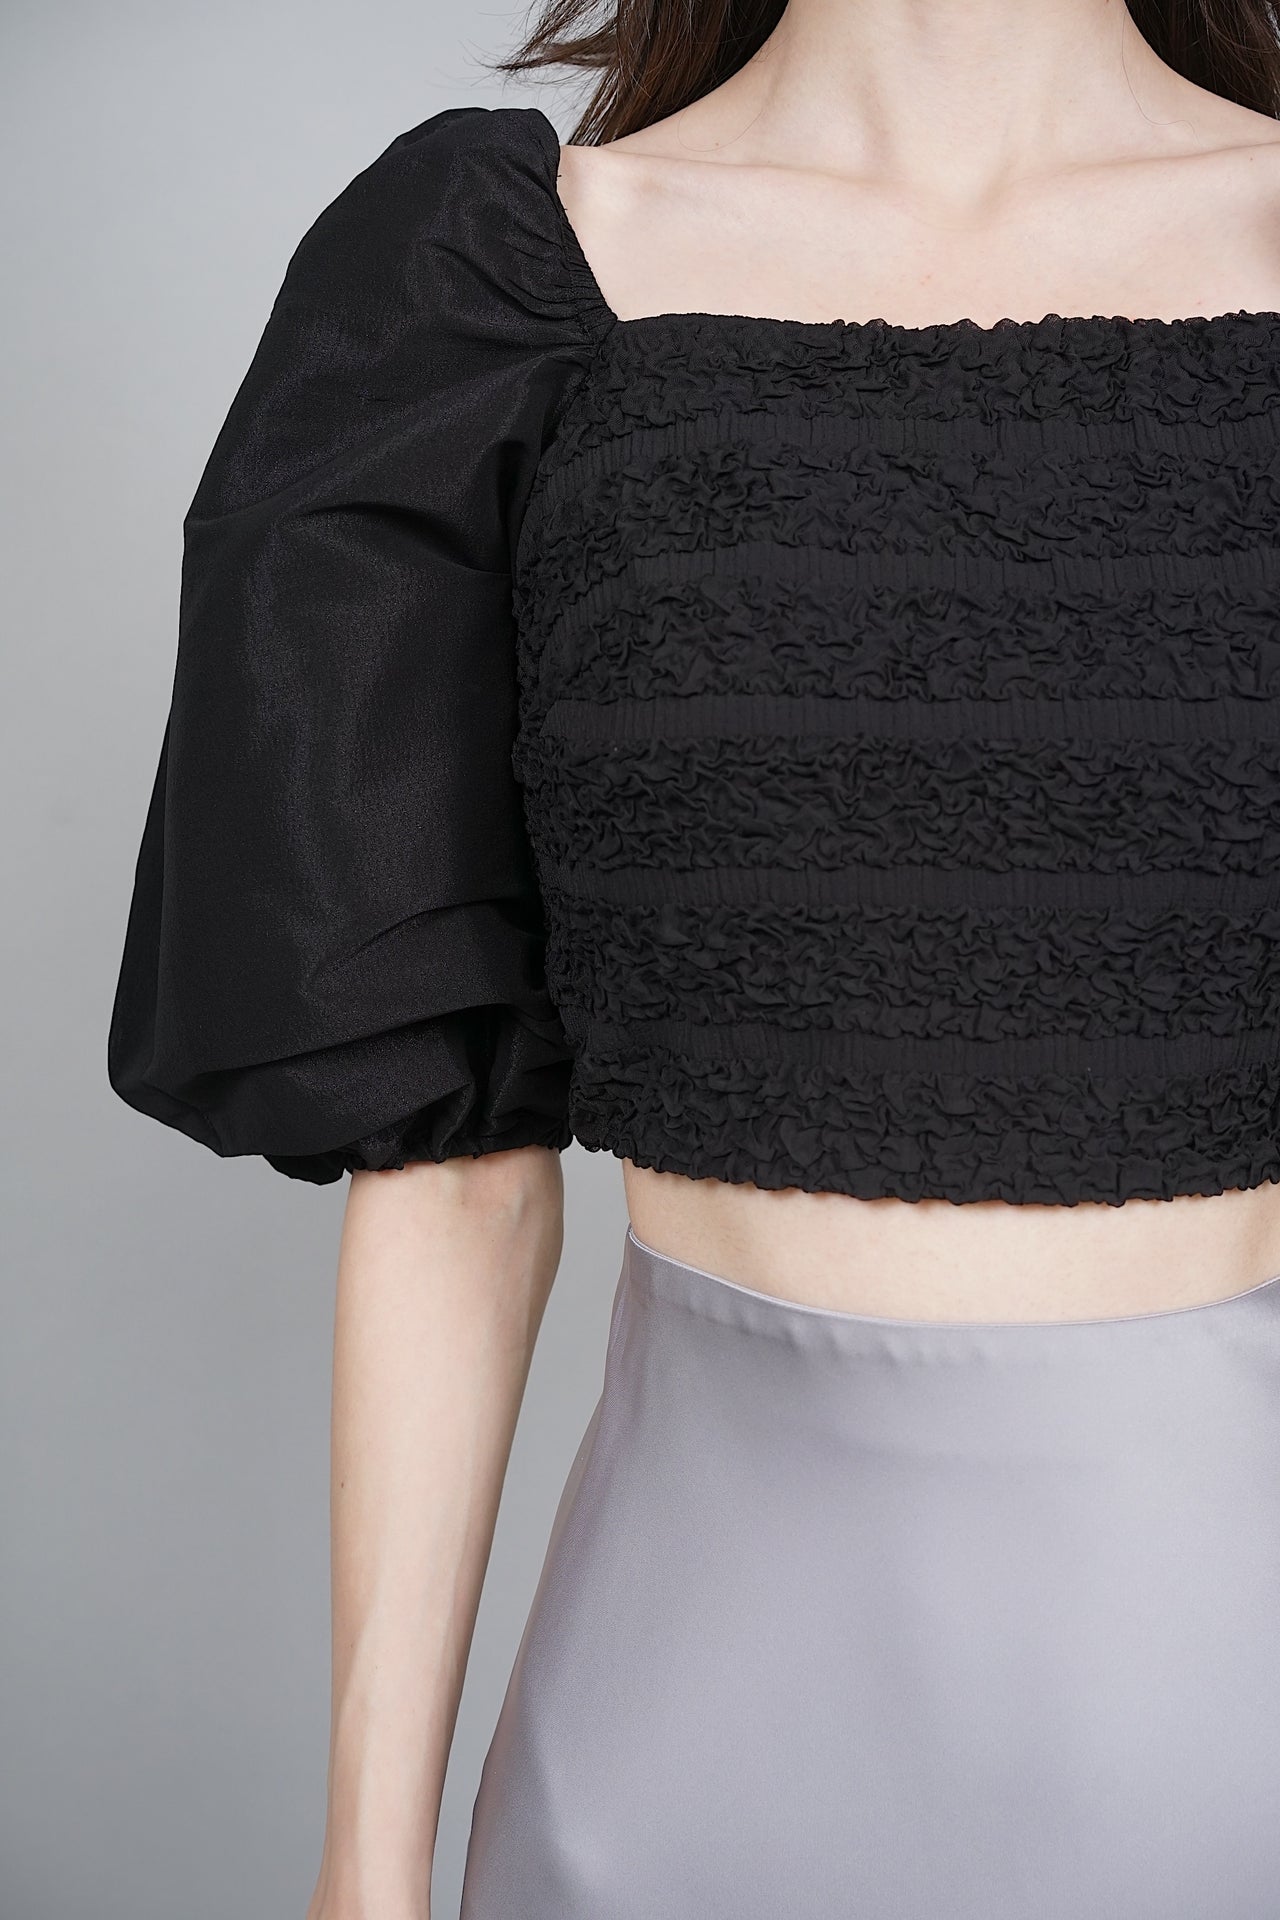 Tylie Puffy Top in Black - Arriving Soon